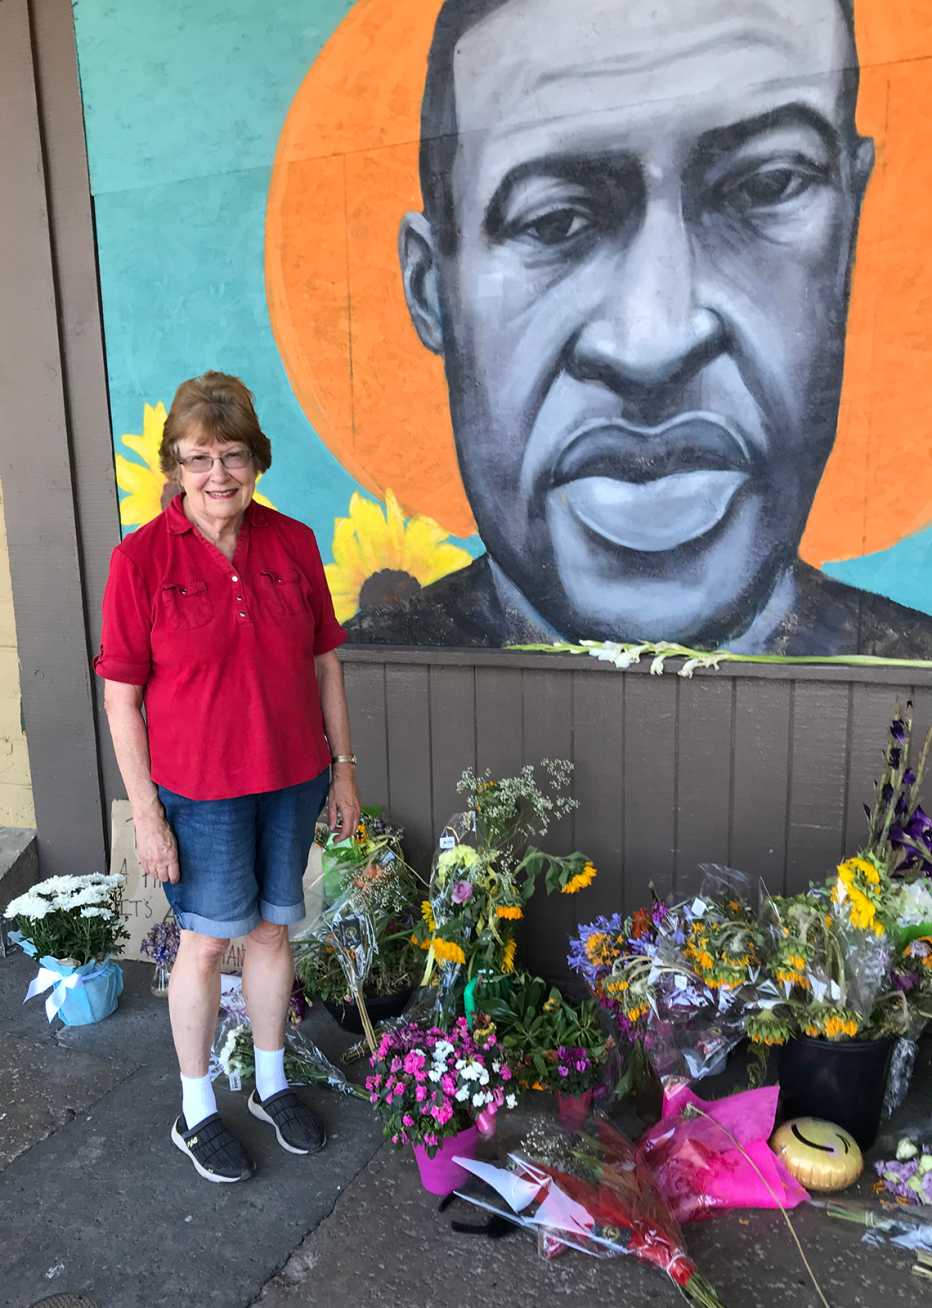 lois knowlton stands next to a memorial mural painted of george floyd that has piles of flowers laid underneath it